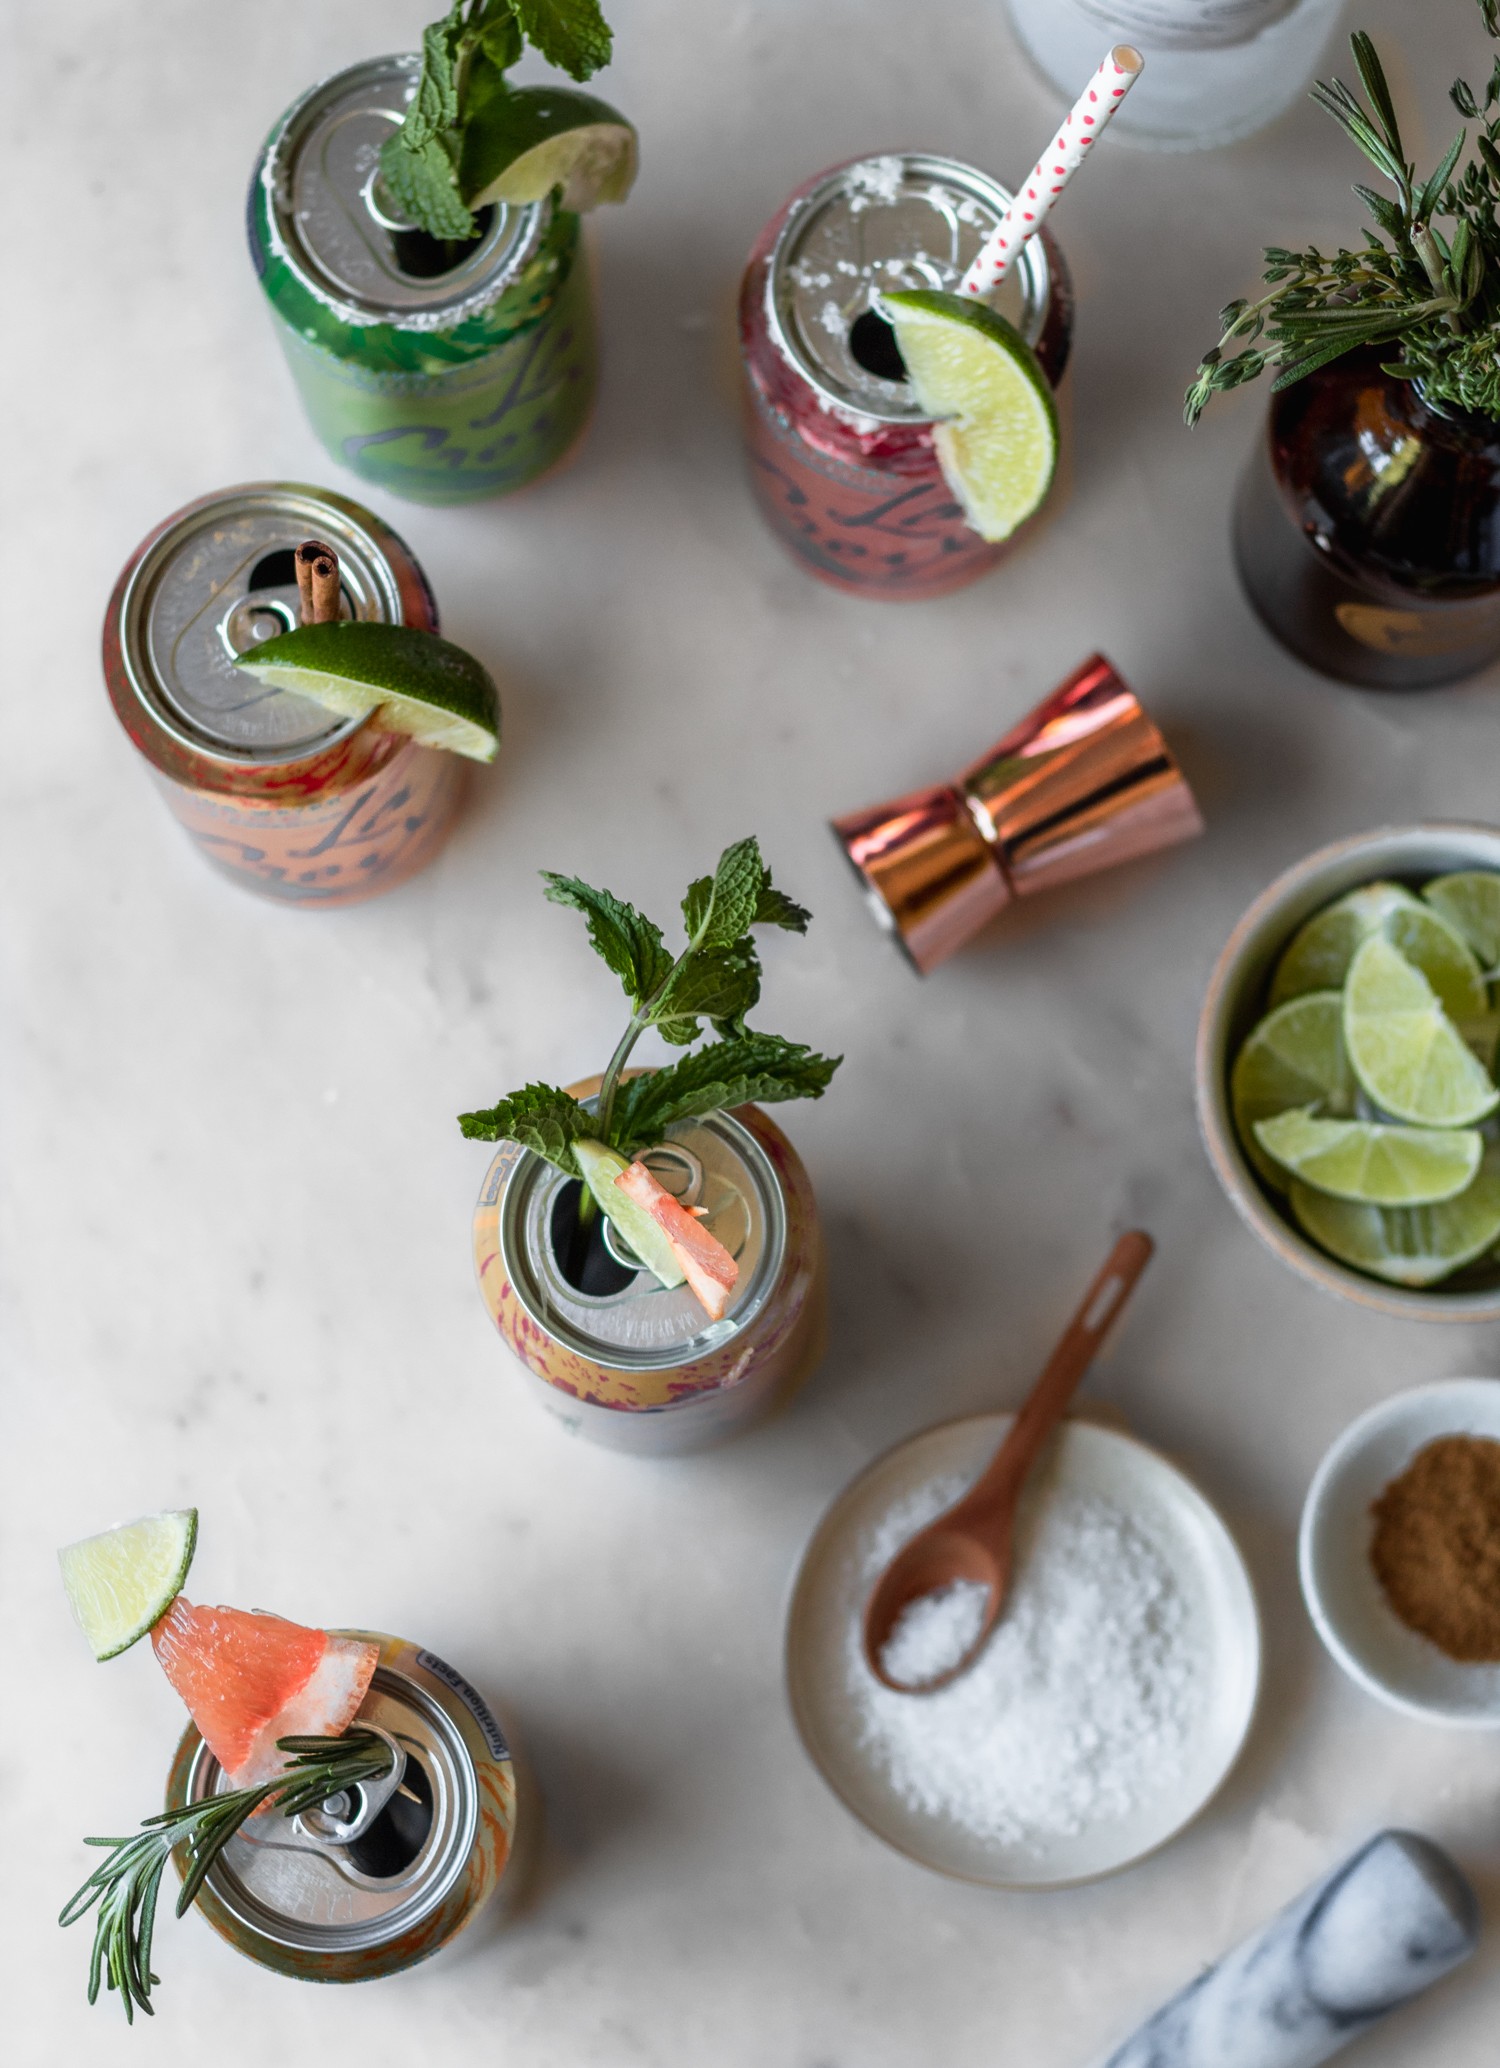 An overhead image of five cans of La Croix with garnishes on a marble counter next to a white bowl of limes, jar of herbs, and bottles of alcohol.